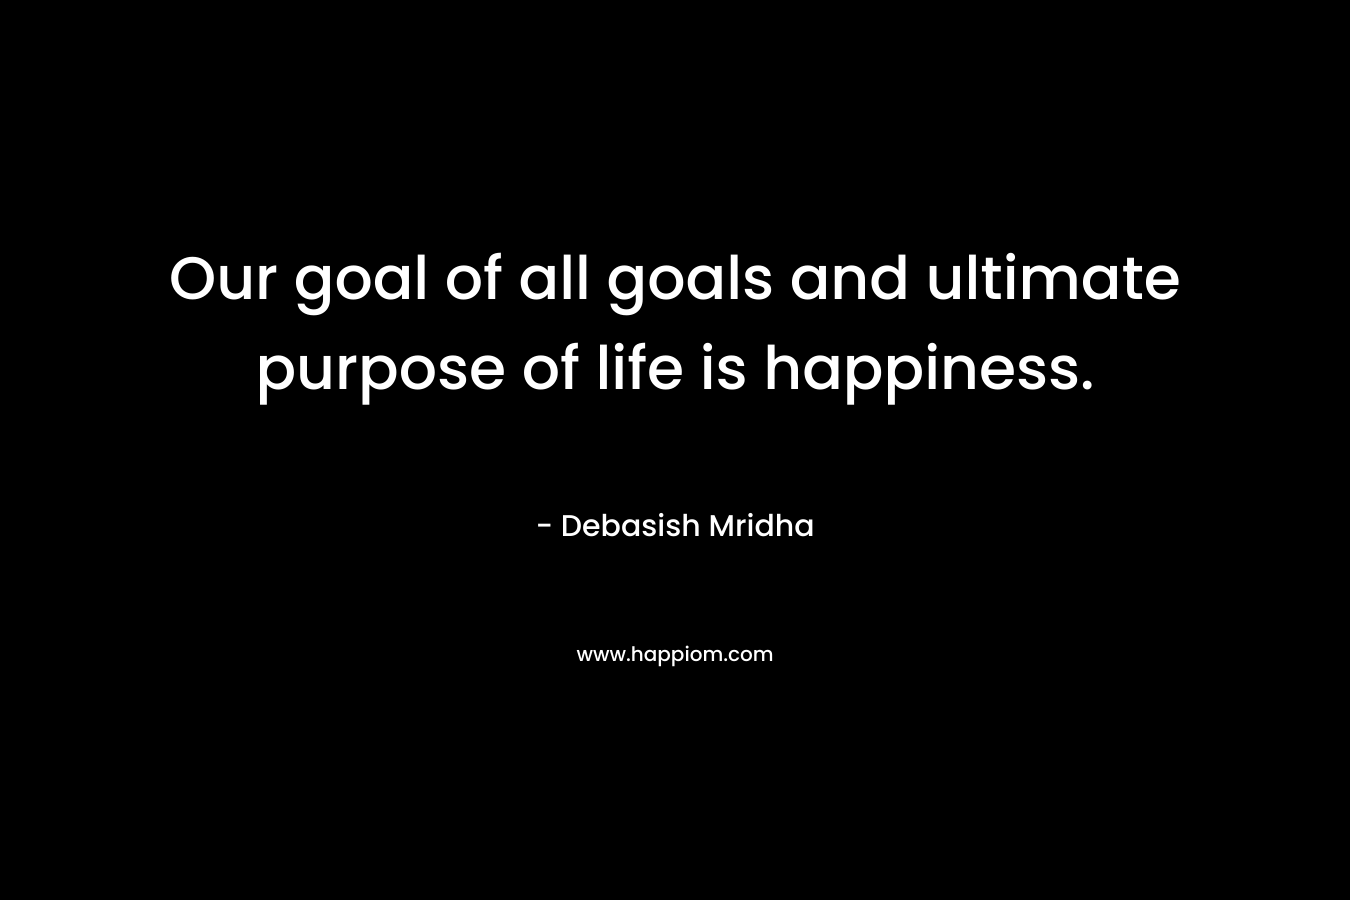 Our goal of all goals and ultimate purpose of life is happiness. – Debasish Mridha